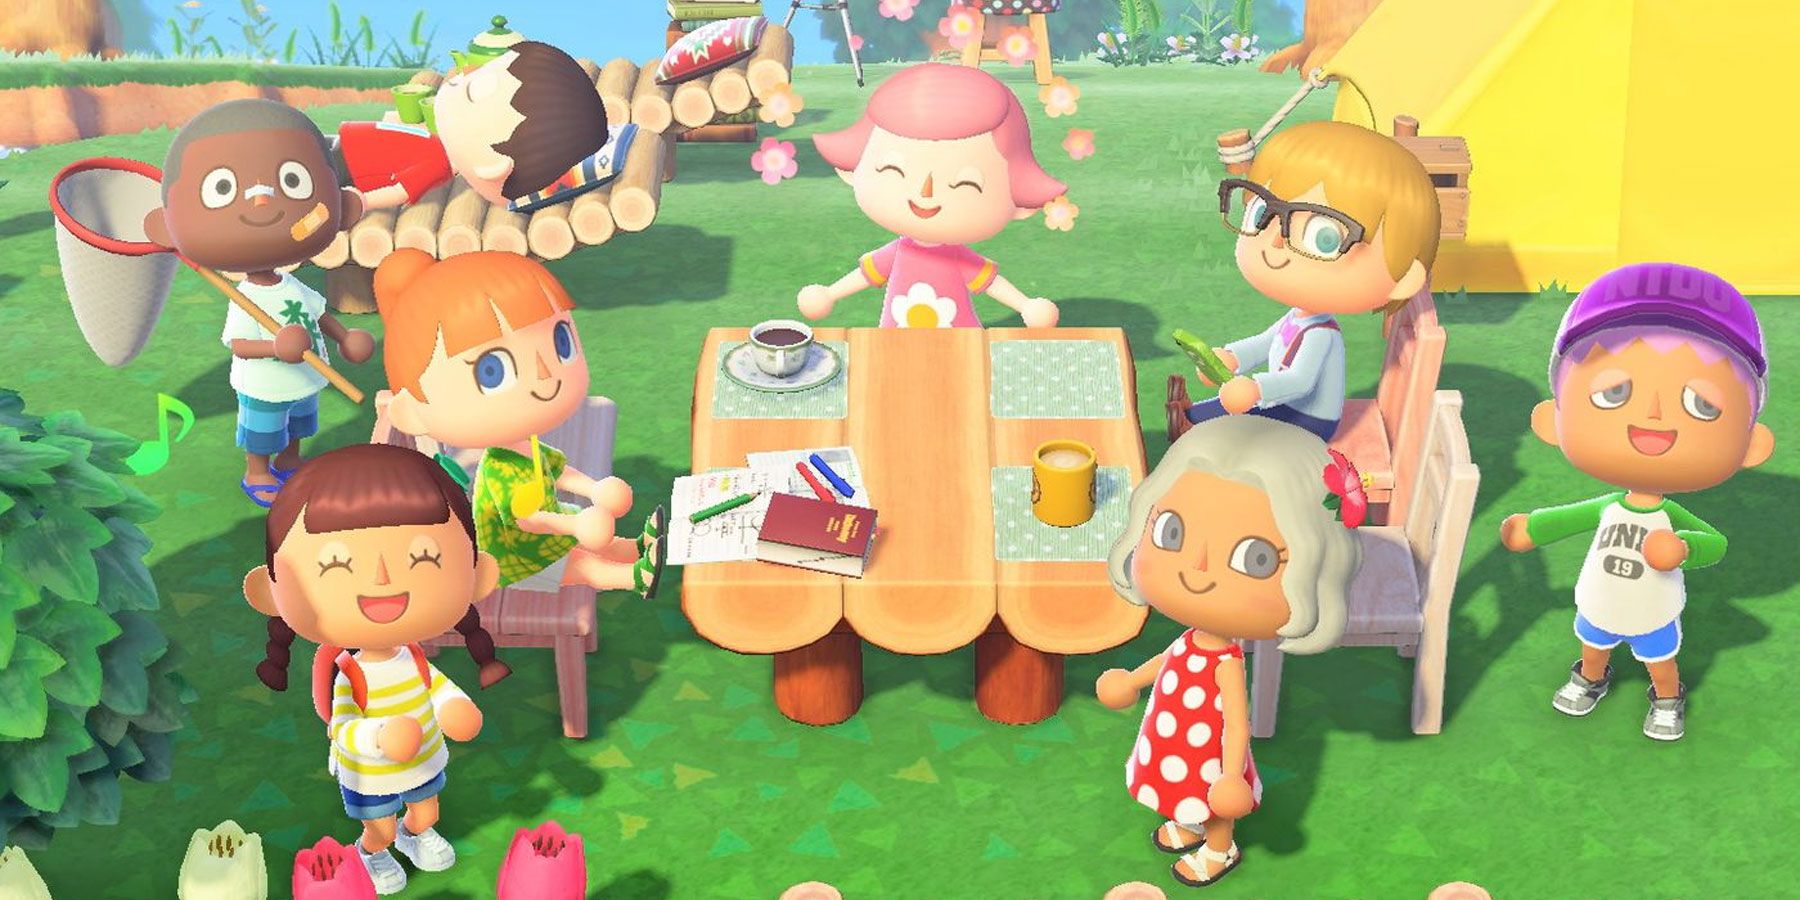 Animal Crossing New Horizons Everything Substantial Added in the New Update